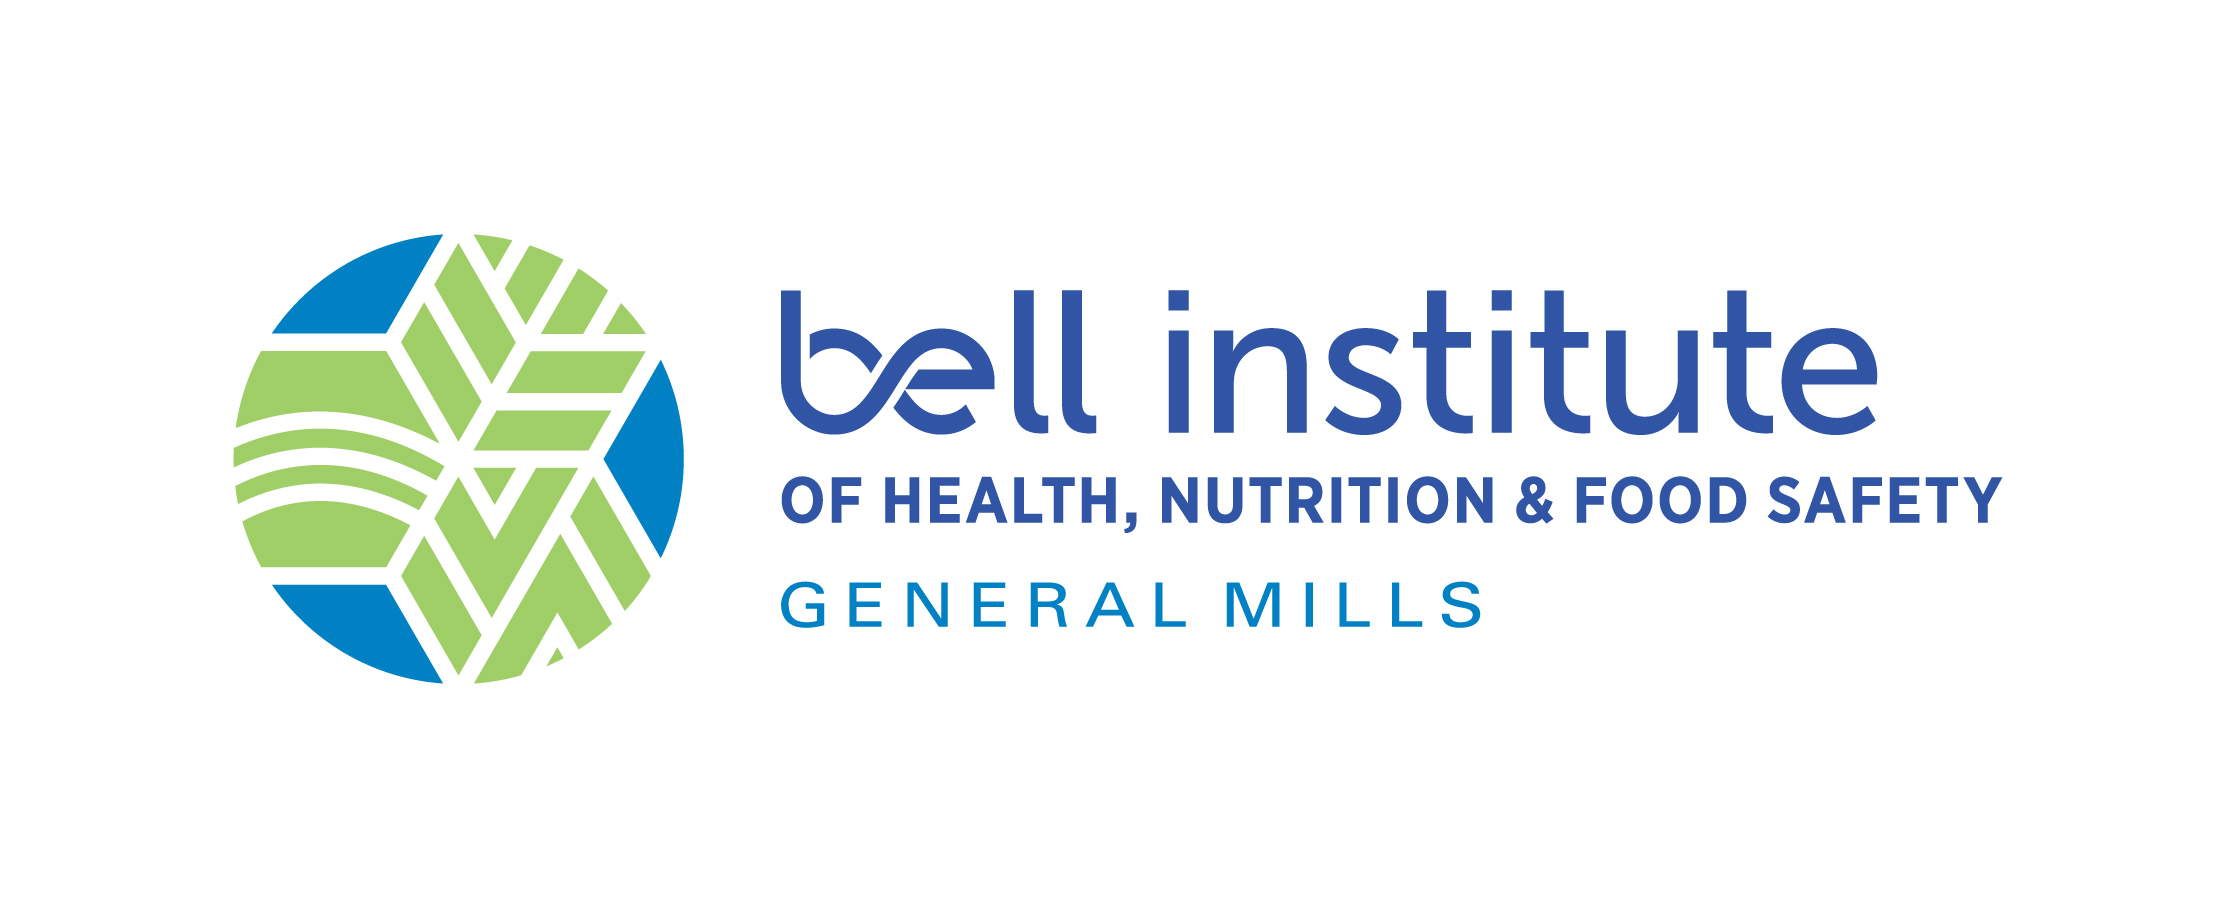 General Mills Bell Institute of Health, Nutrition & Food Safety